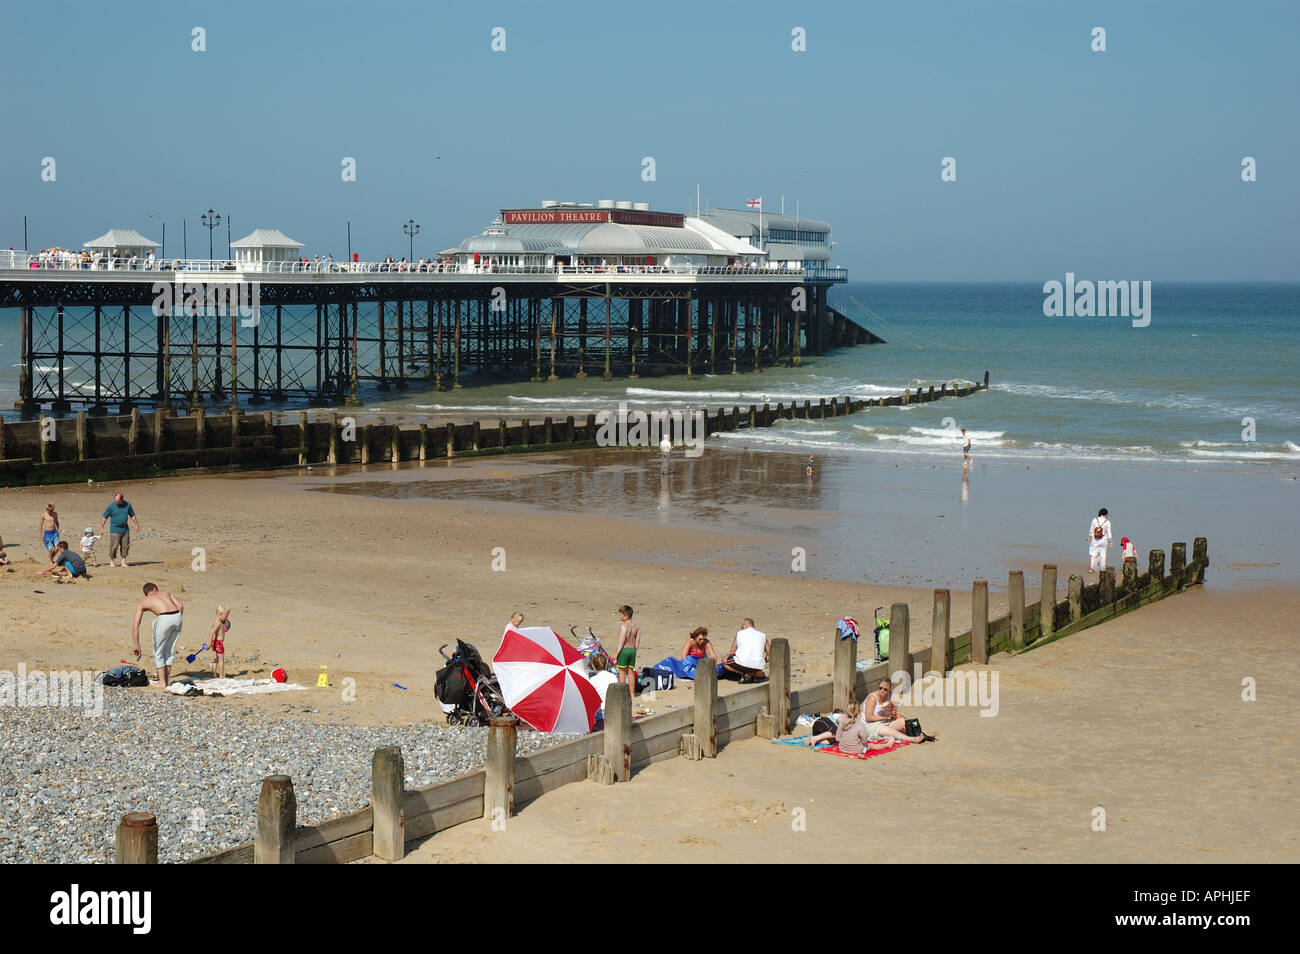 Uk, Norfolk, Cromer, people on beach with pier and Pavilion Theatre Stock Photo